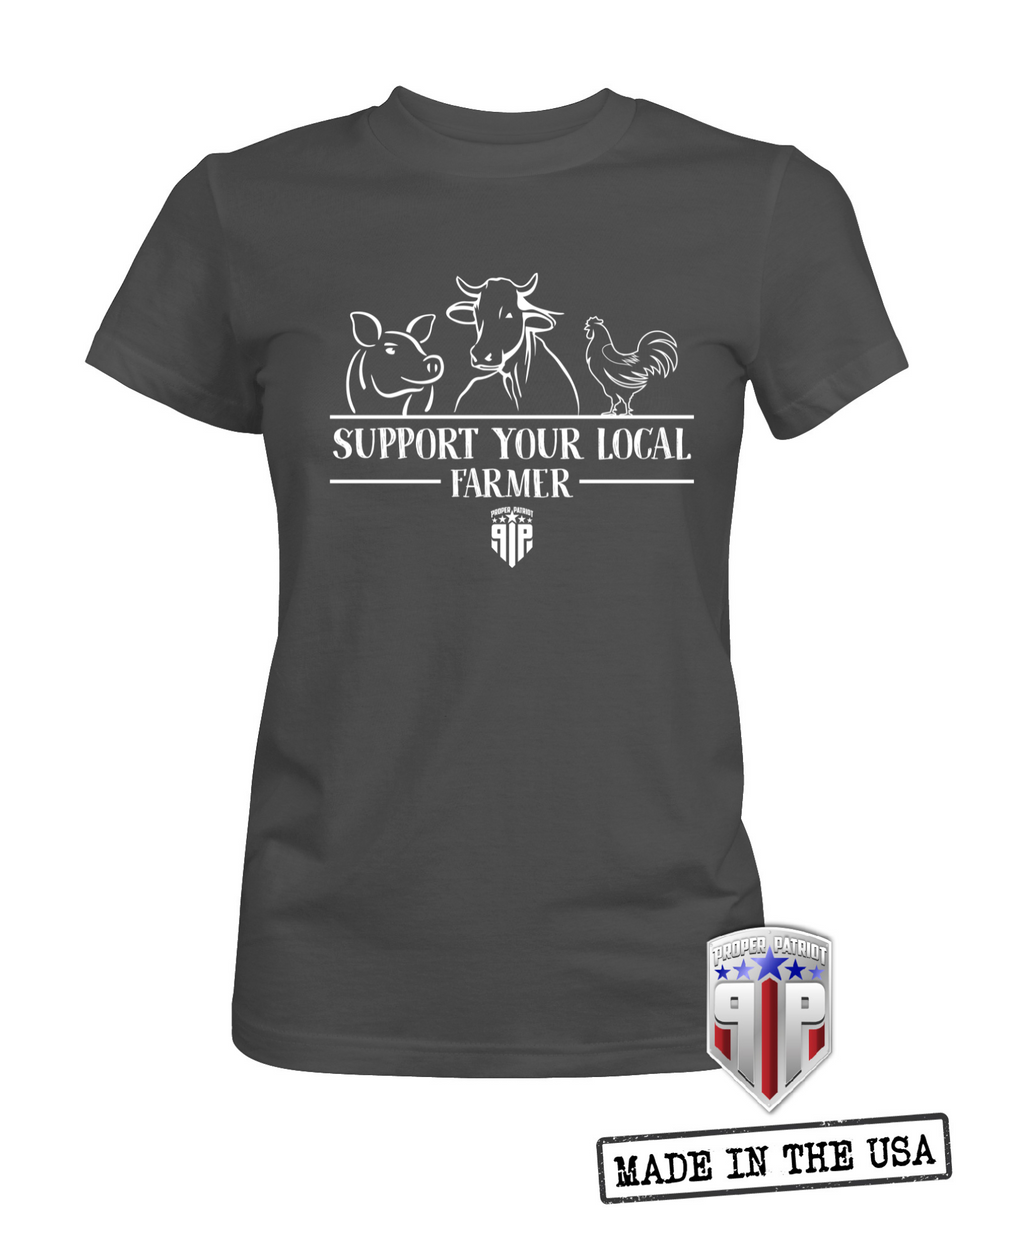 Support Your Local Farmer - Farming Outdoor Apparel - Women's Patriotic Shirts